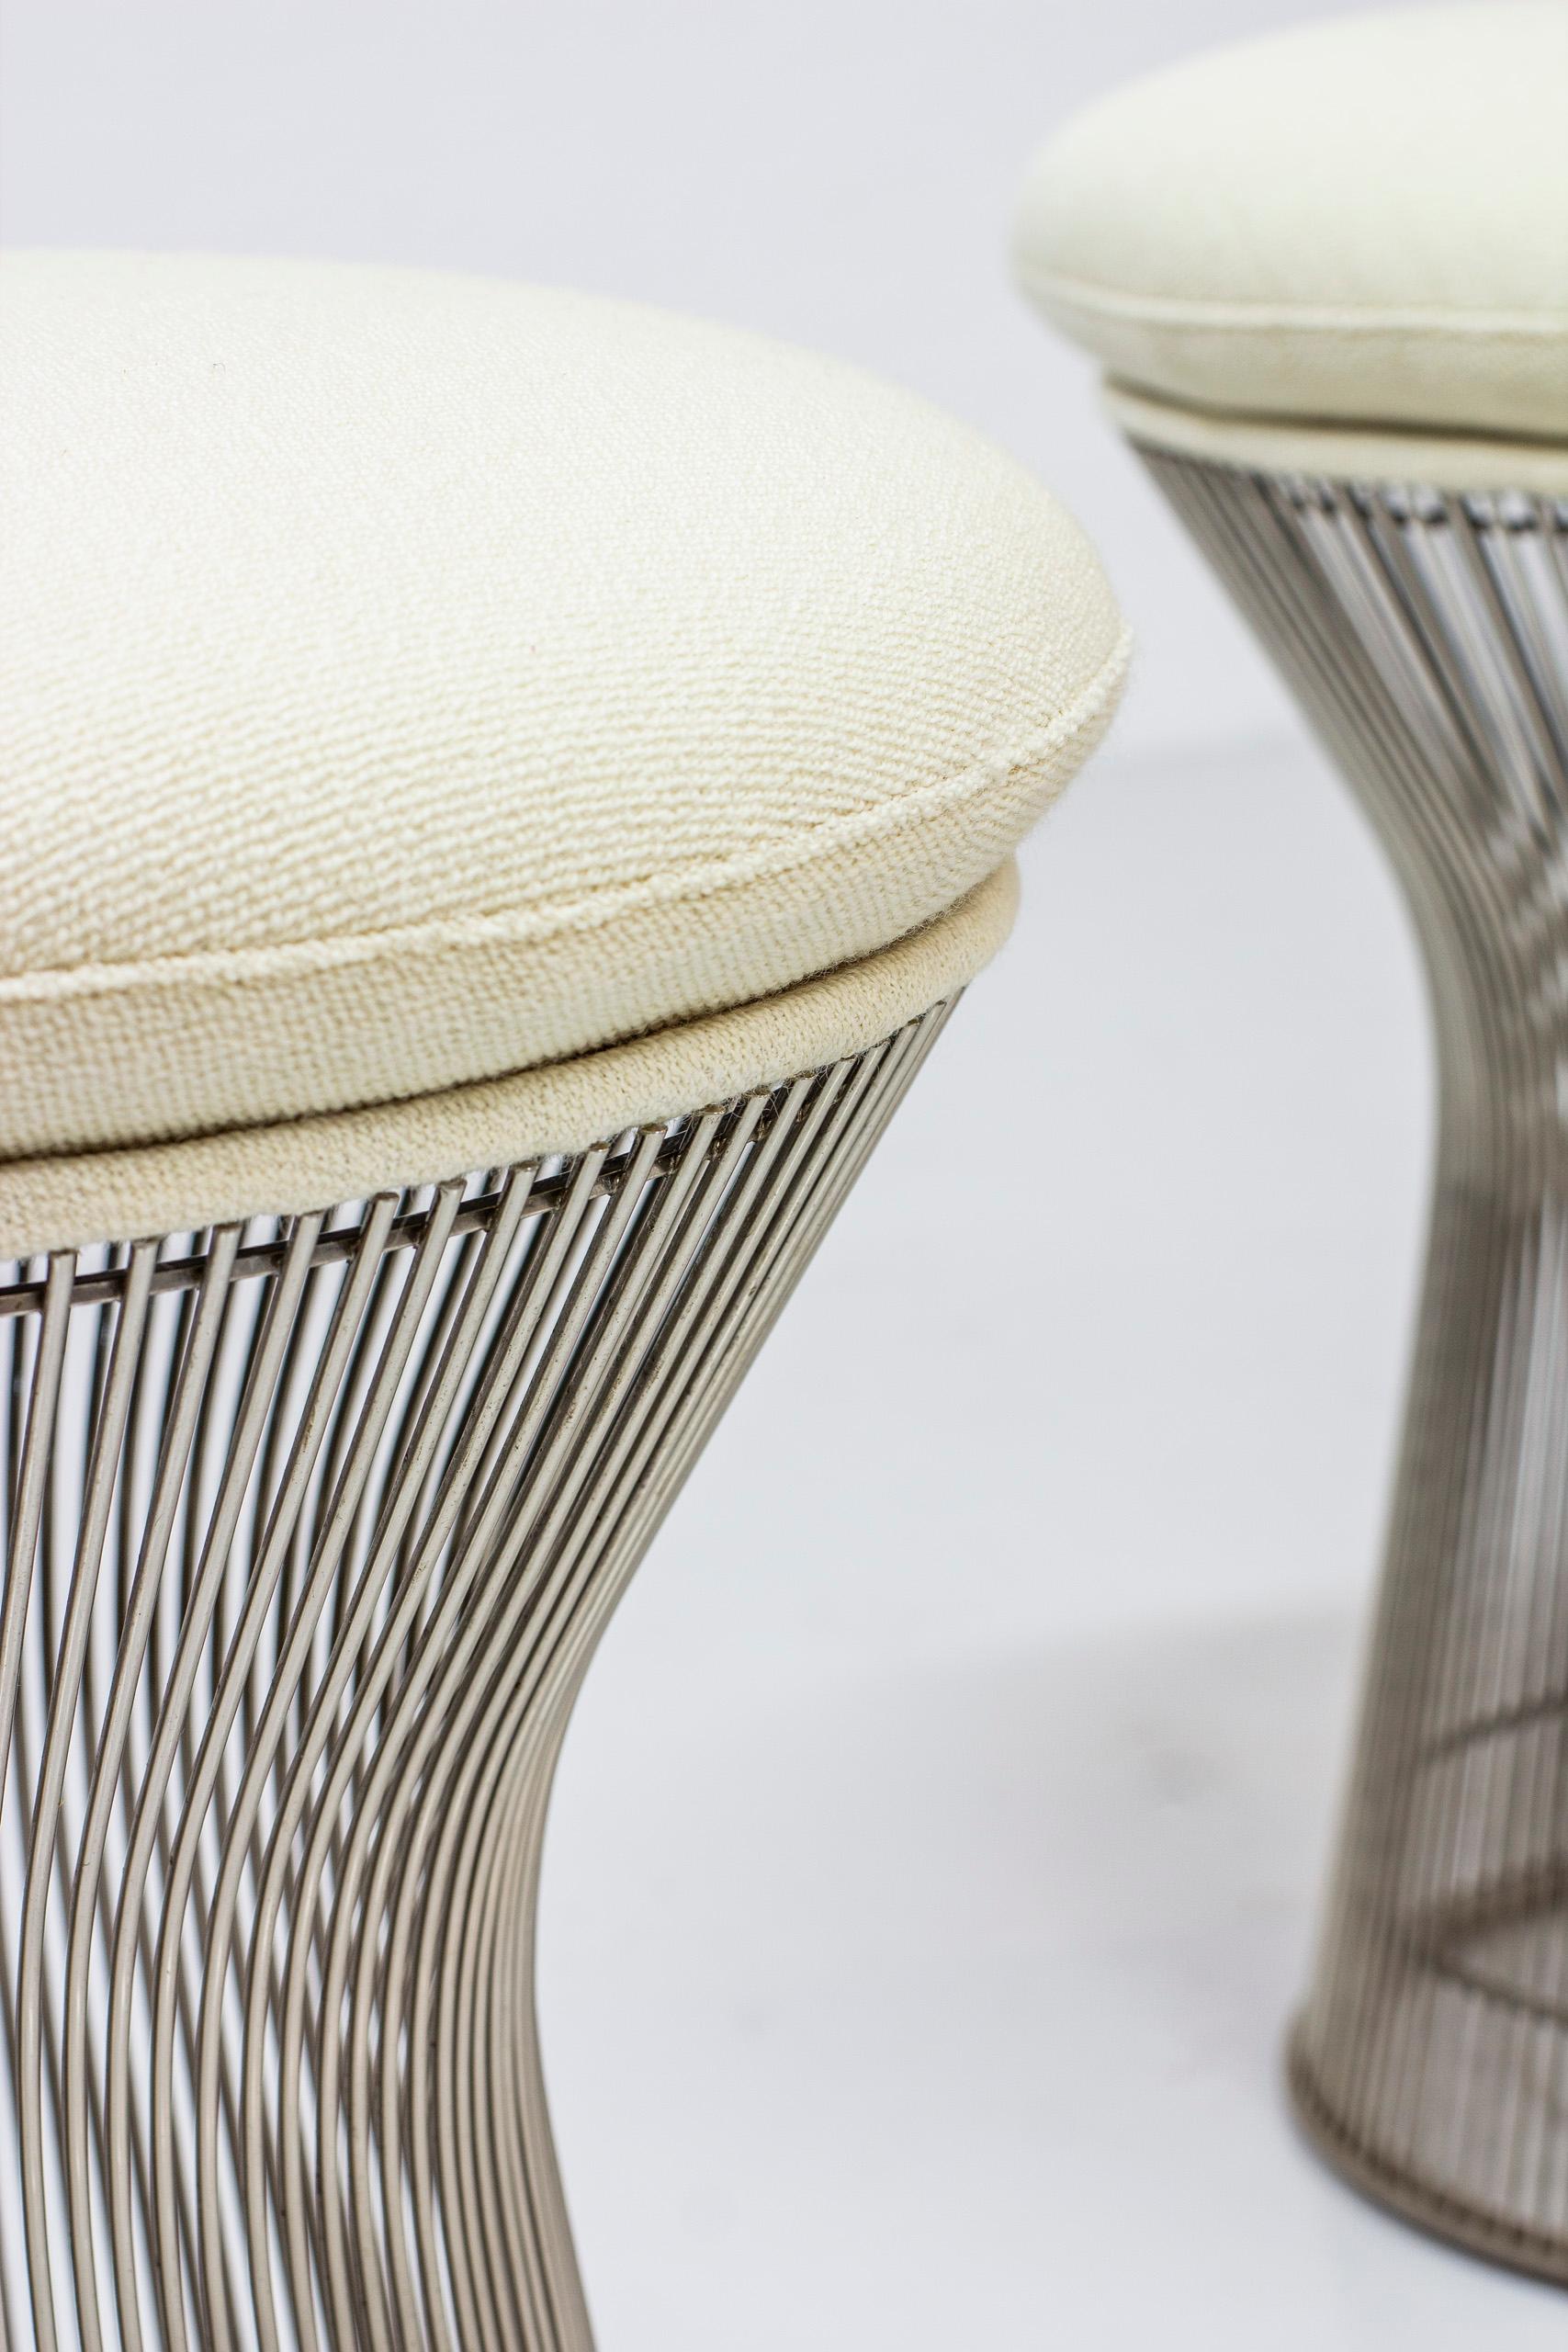 Mid-Century Modern Pair of Wire Stools by Warren Platner for Knoll